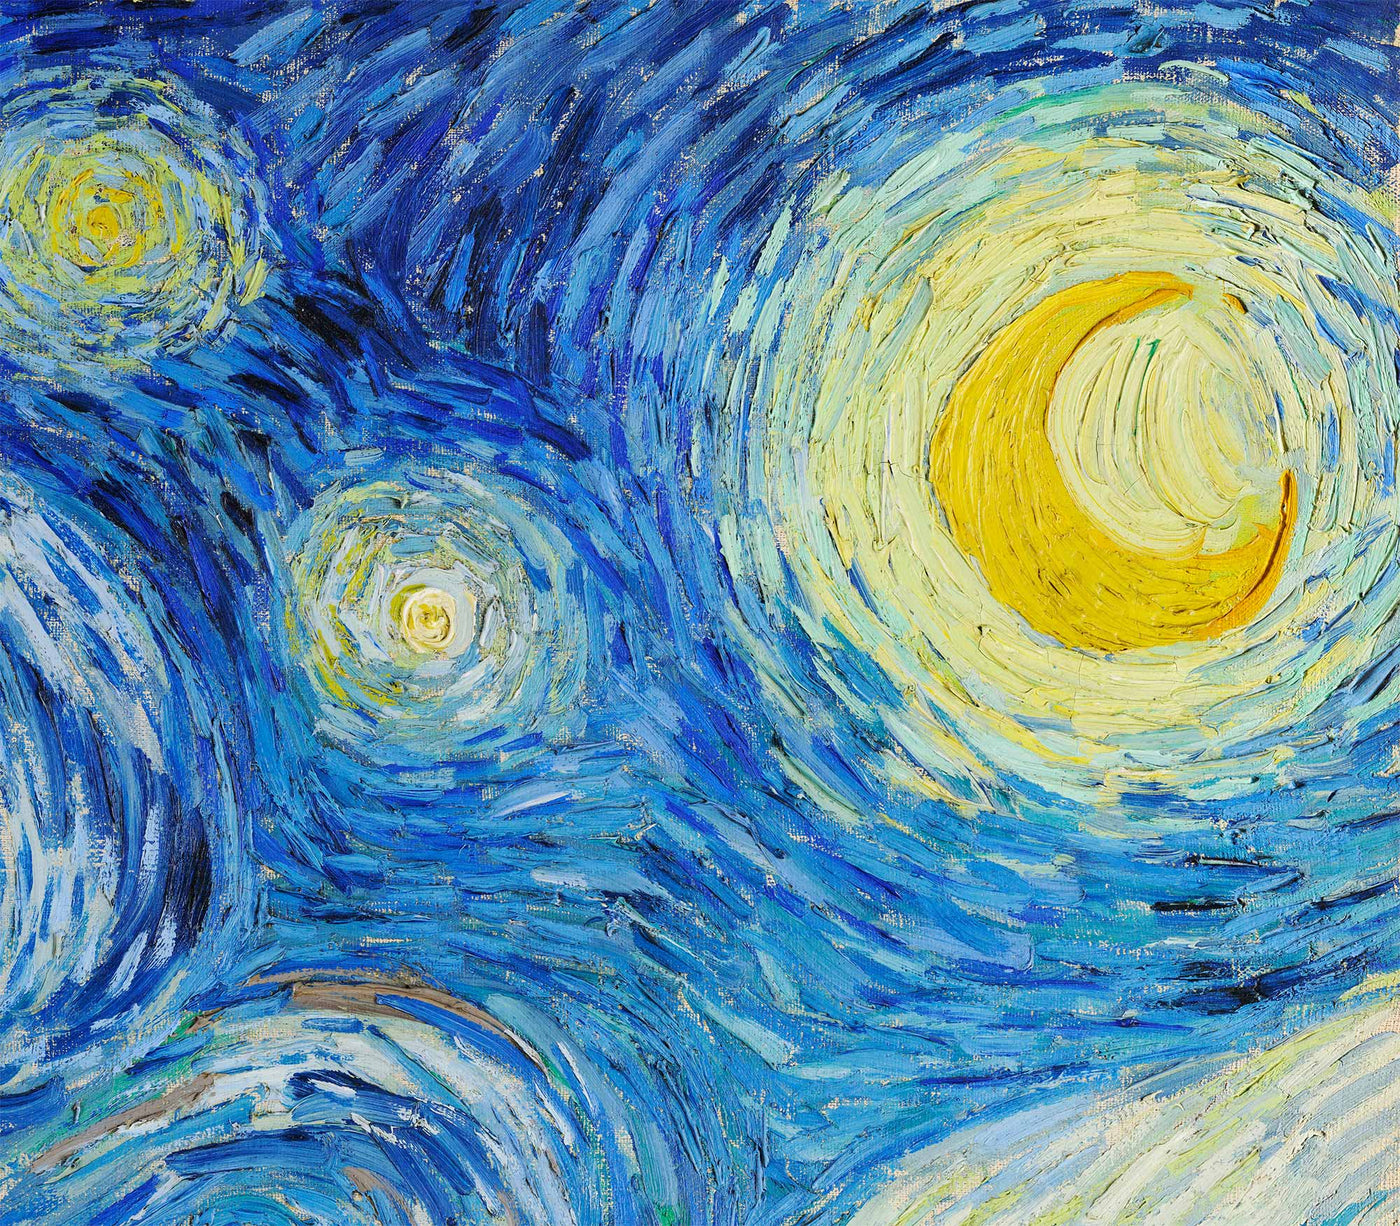 The Starry Night by Vincent van Gogh, 1889 - Personalised Fine Art ...